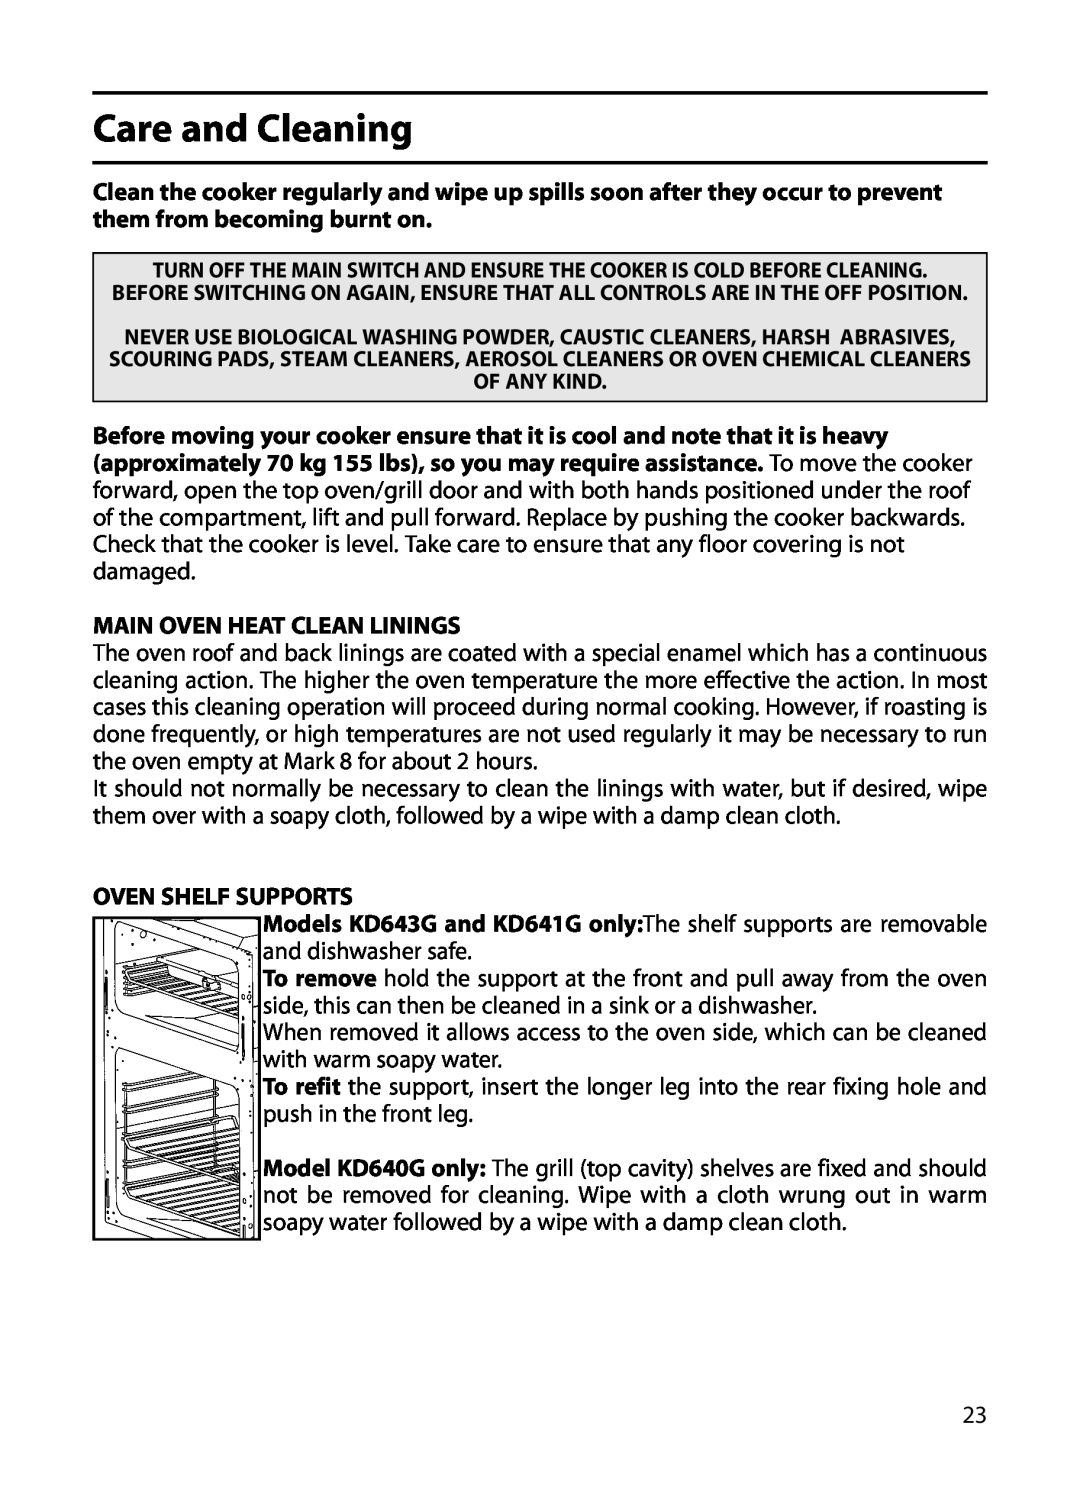 Indesit KD640G, KD641G, KD643G manual Care and Cleaning, Main Oven Heat Clean Linings, Oven Shelf Supports 